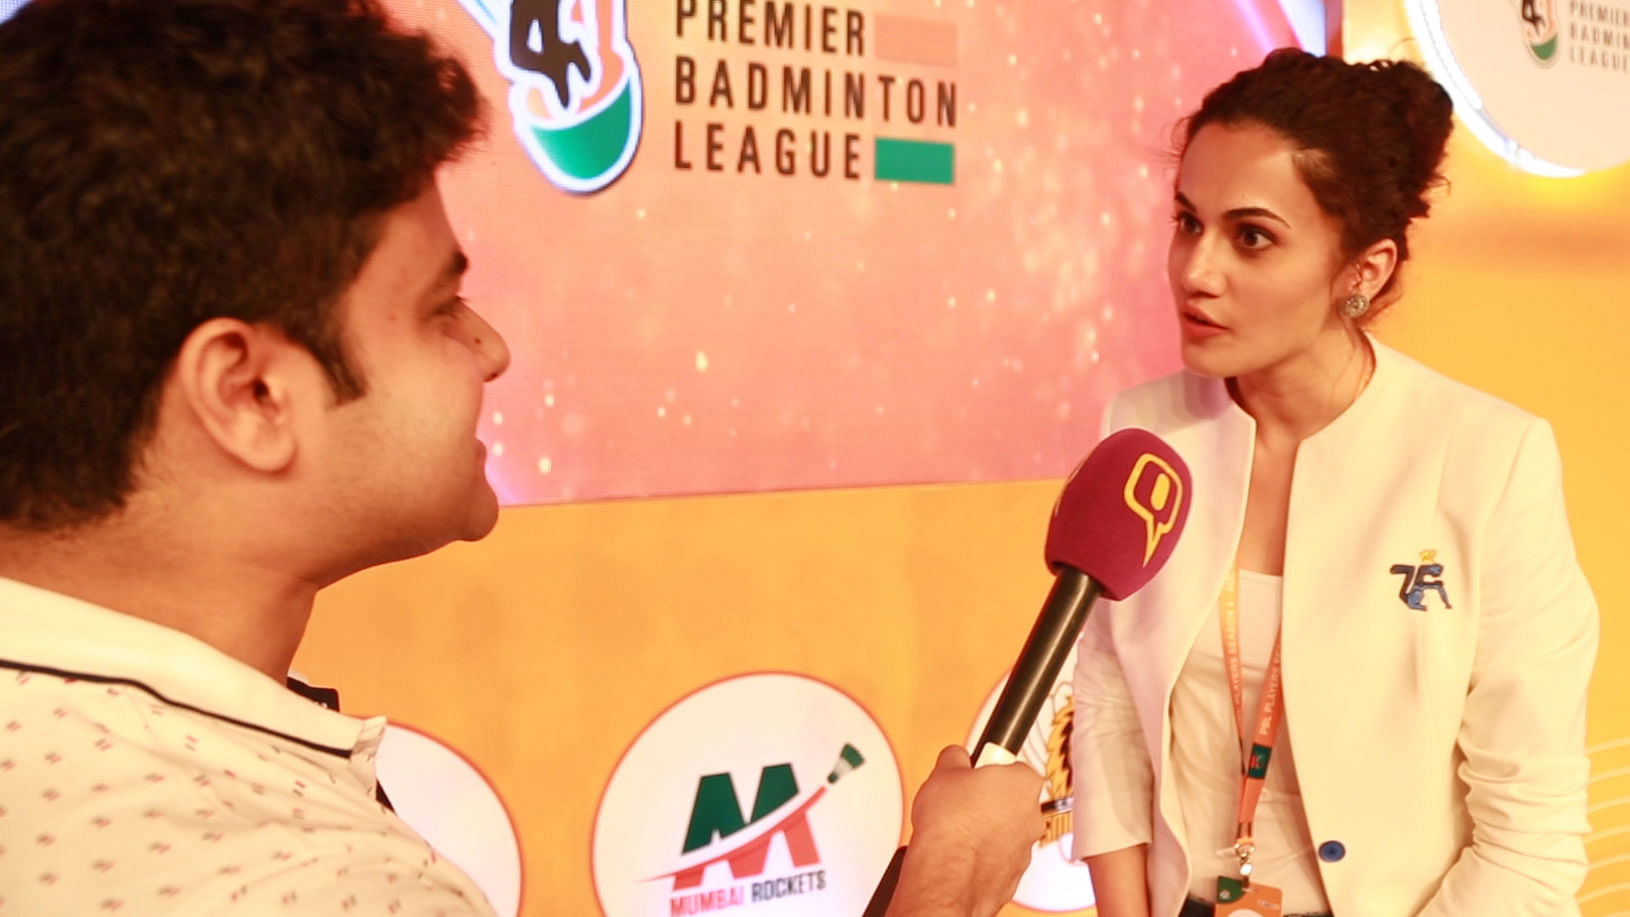 Taapsee Pannu speaks to <b>The Quint</b> at the Premier Badminton League auction.